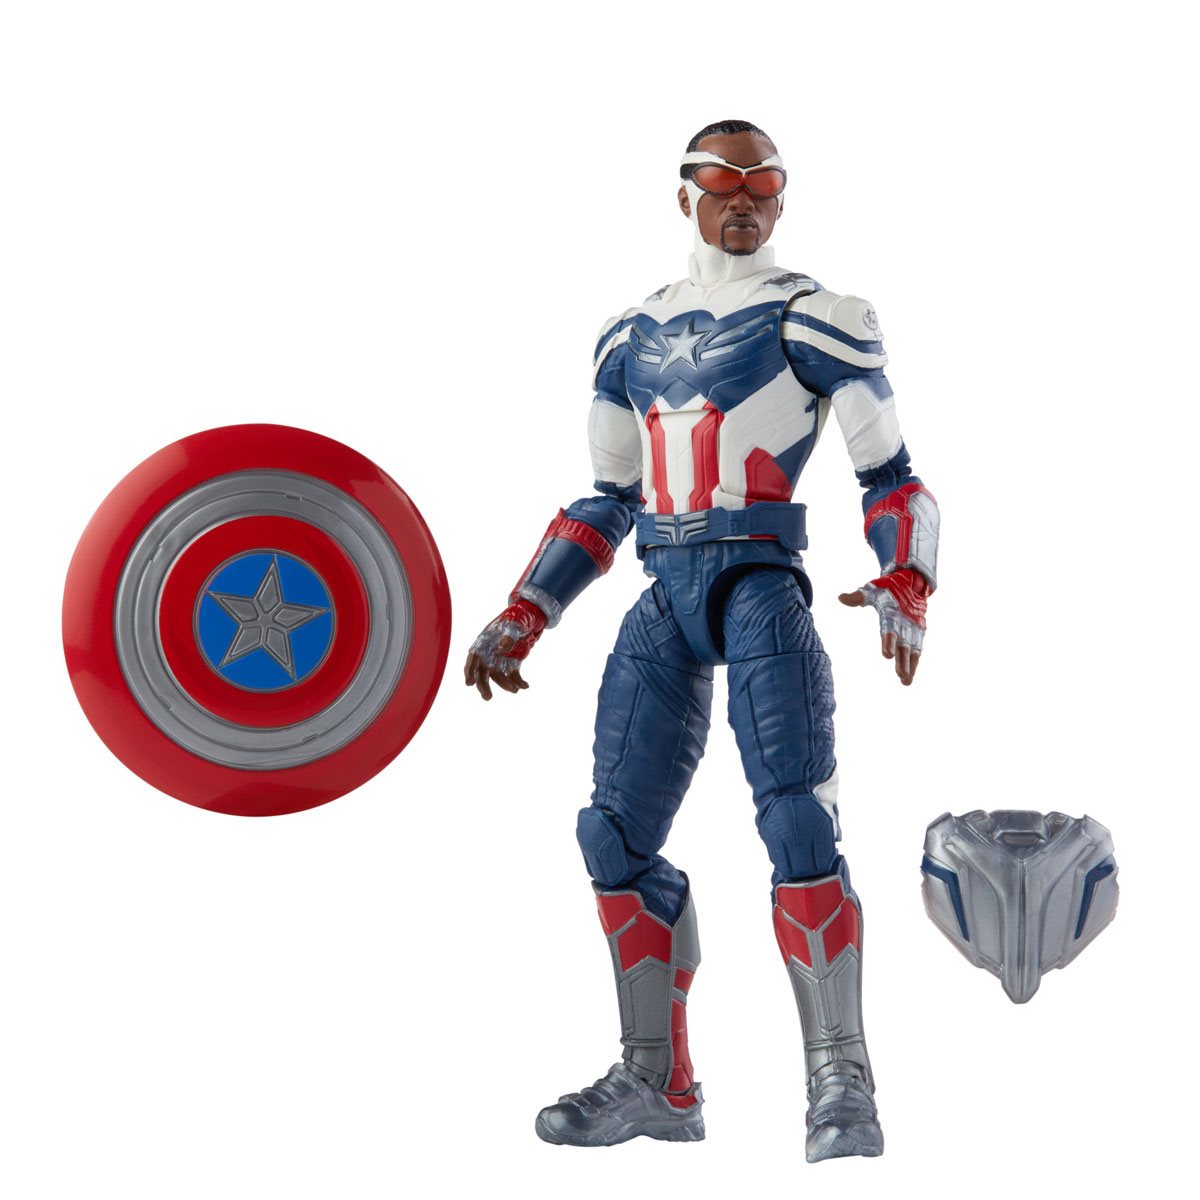 Avengers Marvel Captain America 6-in Basic Action Figure with Iconic Shield NEW!